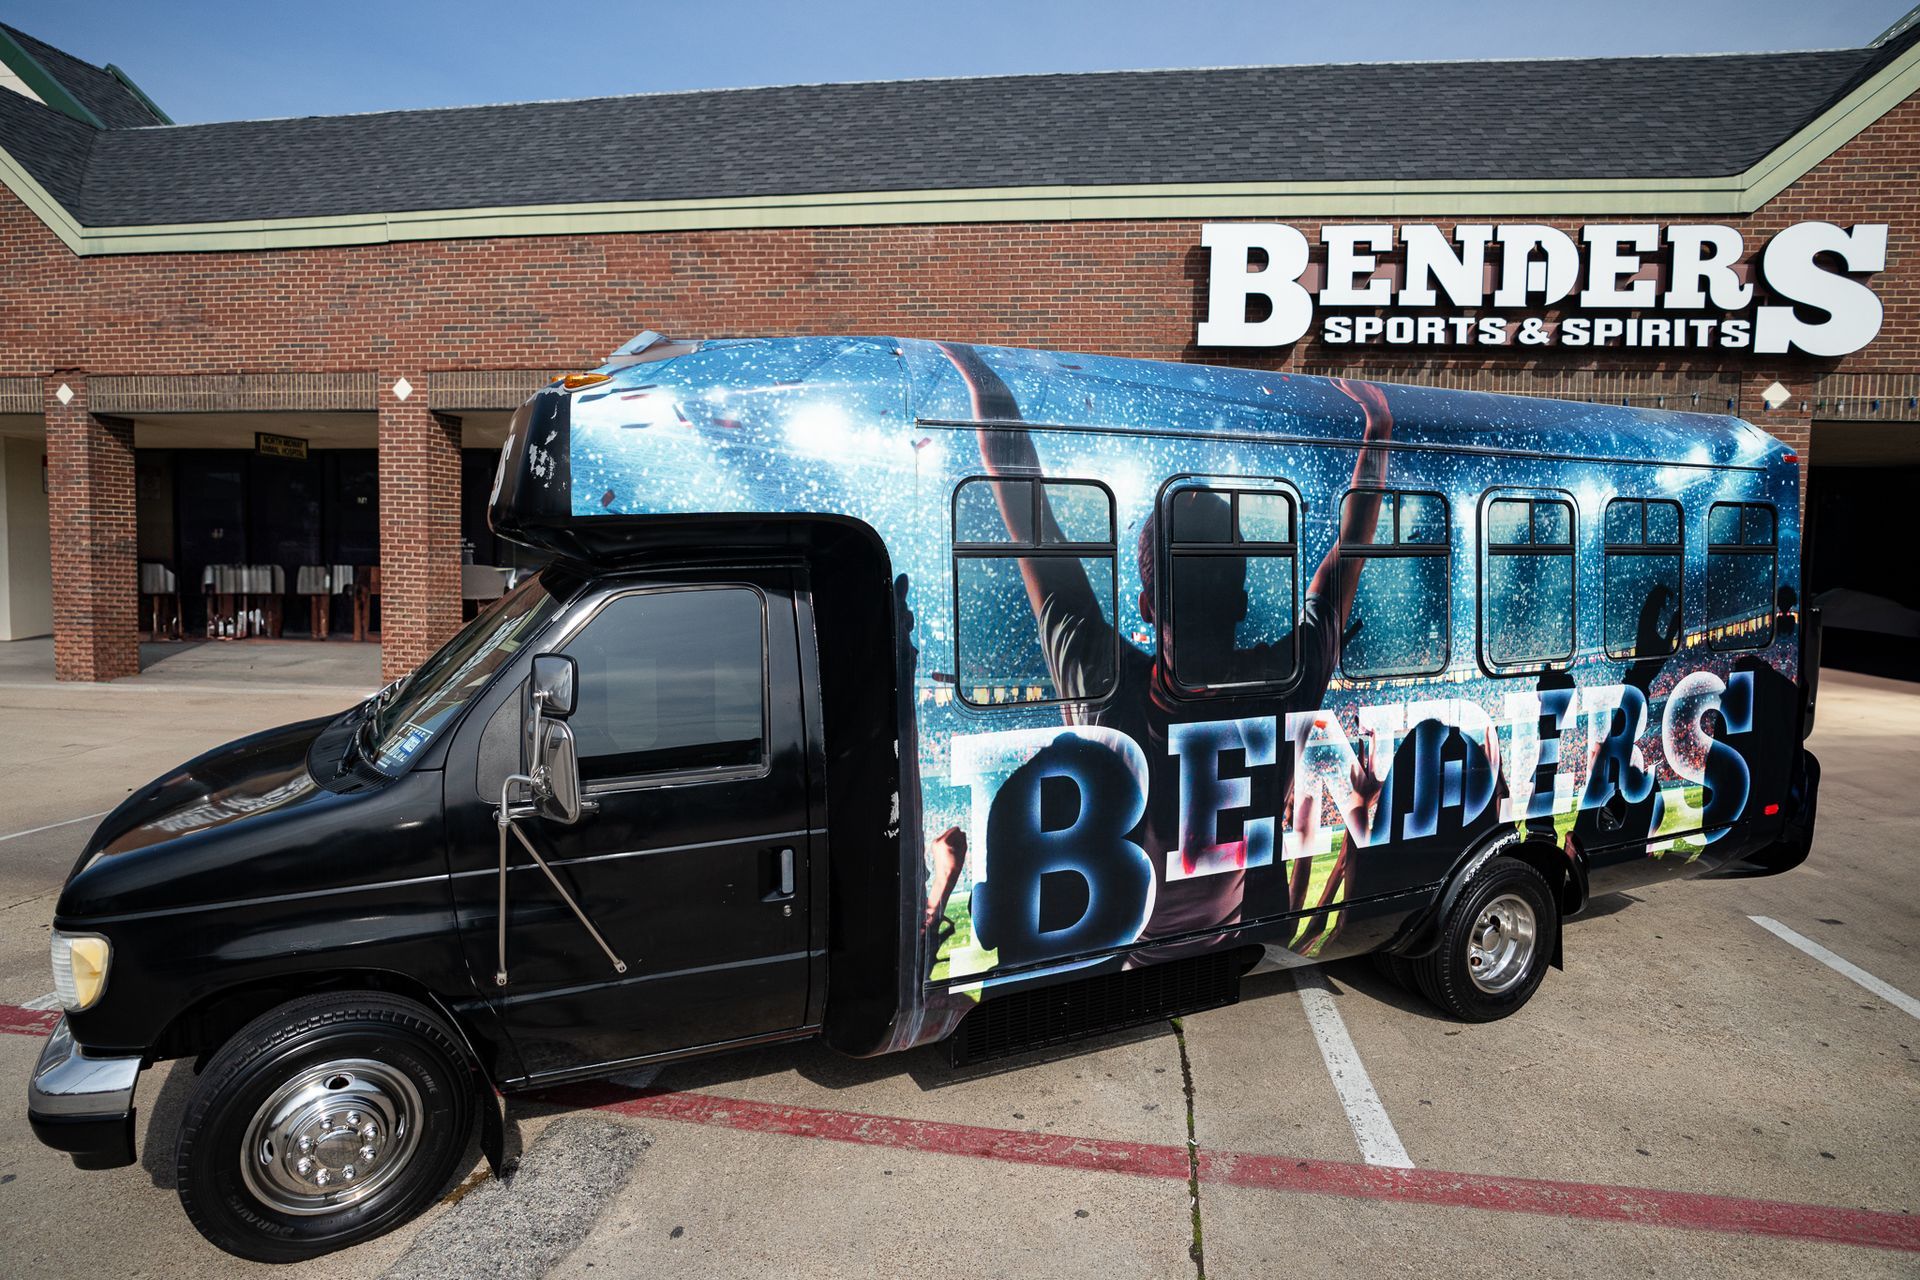 A black van is parked in front of benders sports & spirits